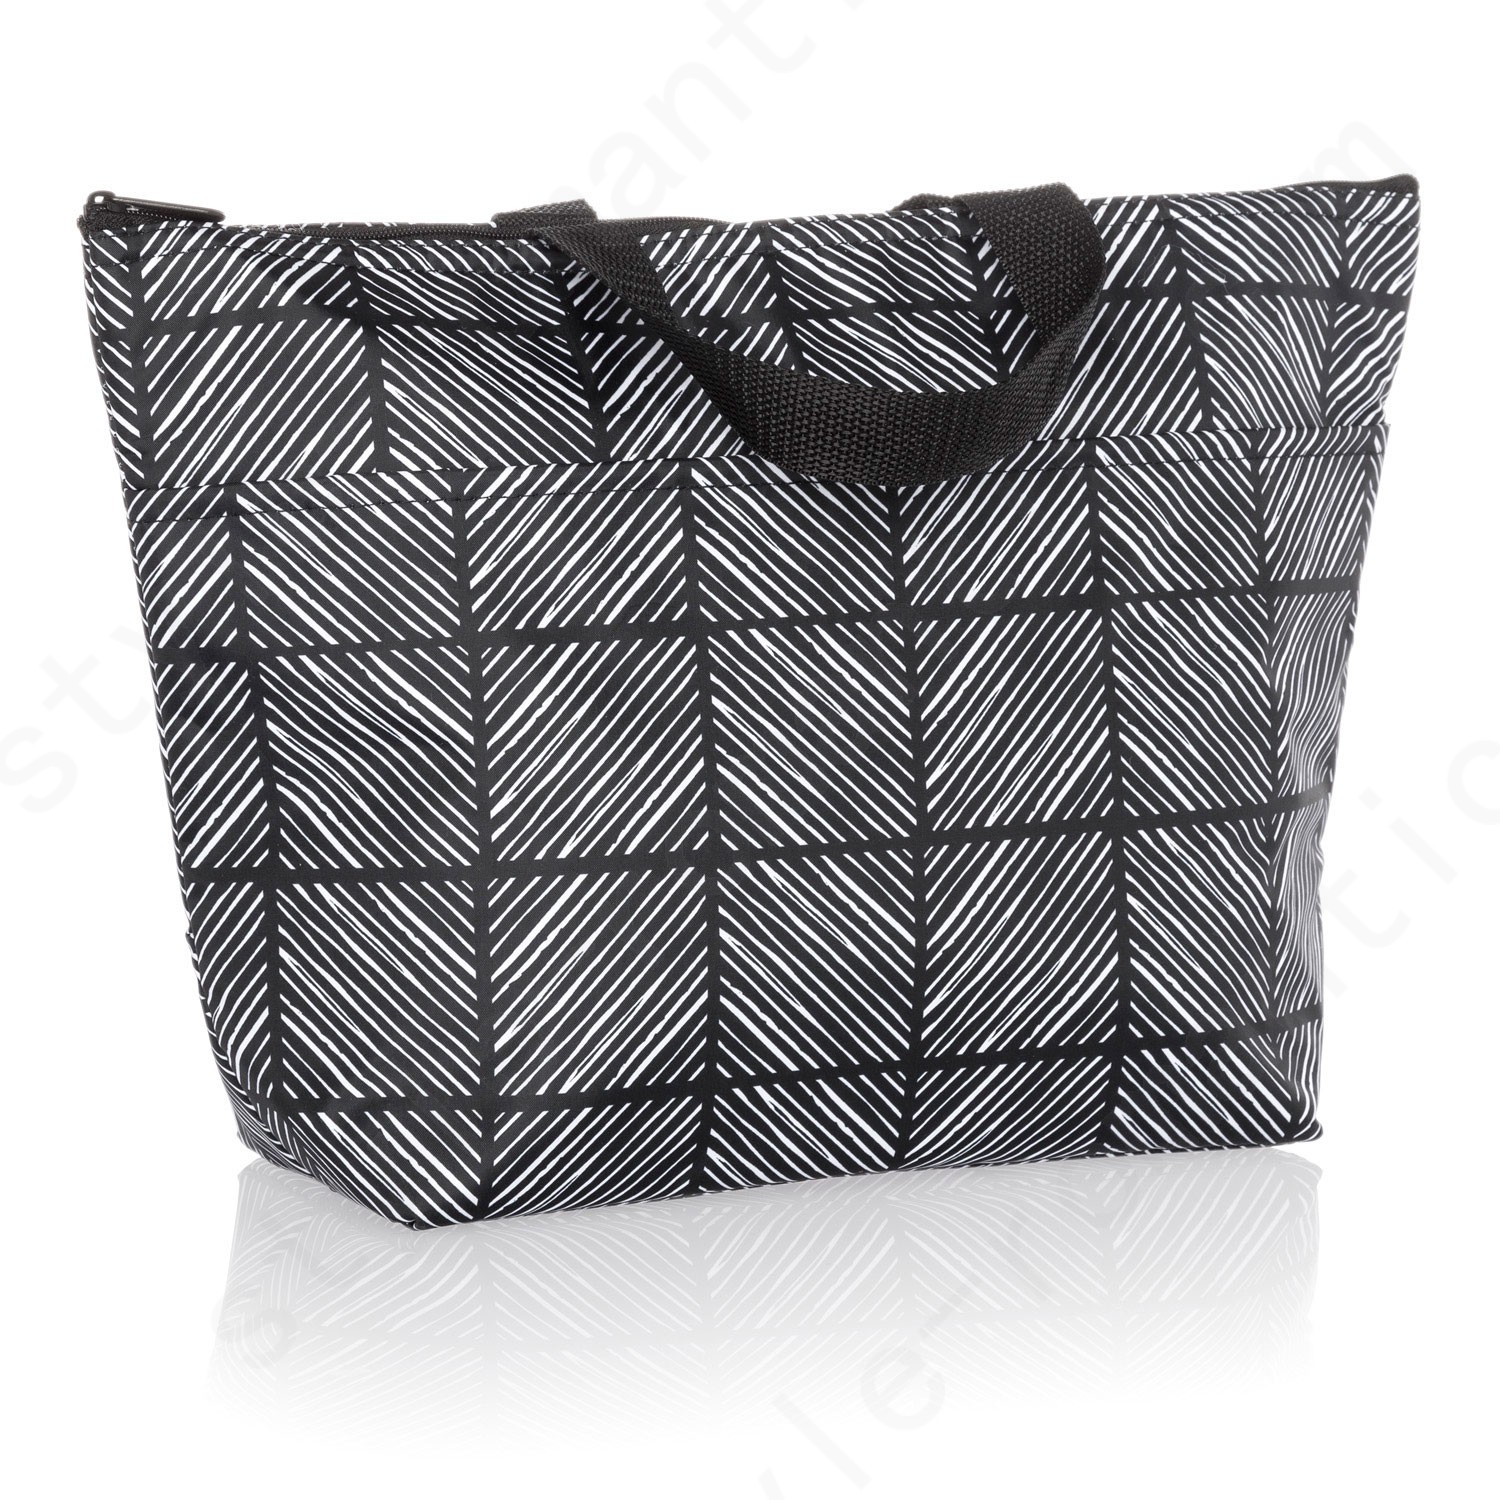 Thirty-One Gifts Thermal Tote - Chevron Squares Handbag Accessories - Thirty-One Gifts Thermal Tote - Chevron Squares Handbag Accessories